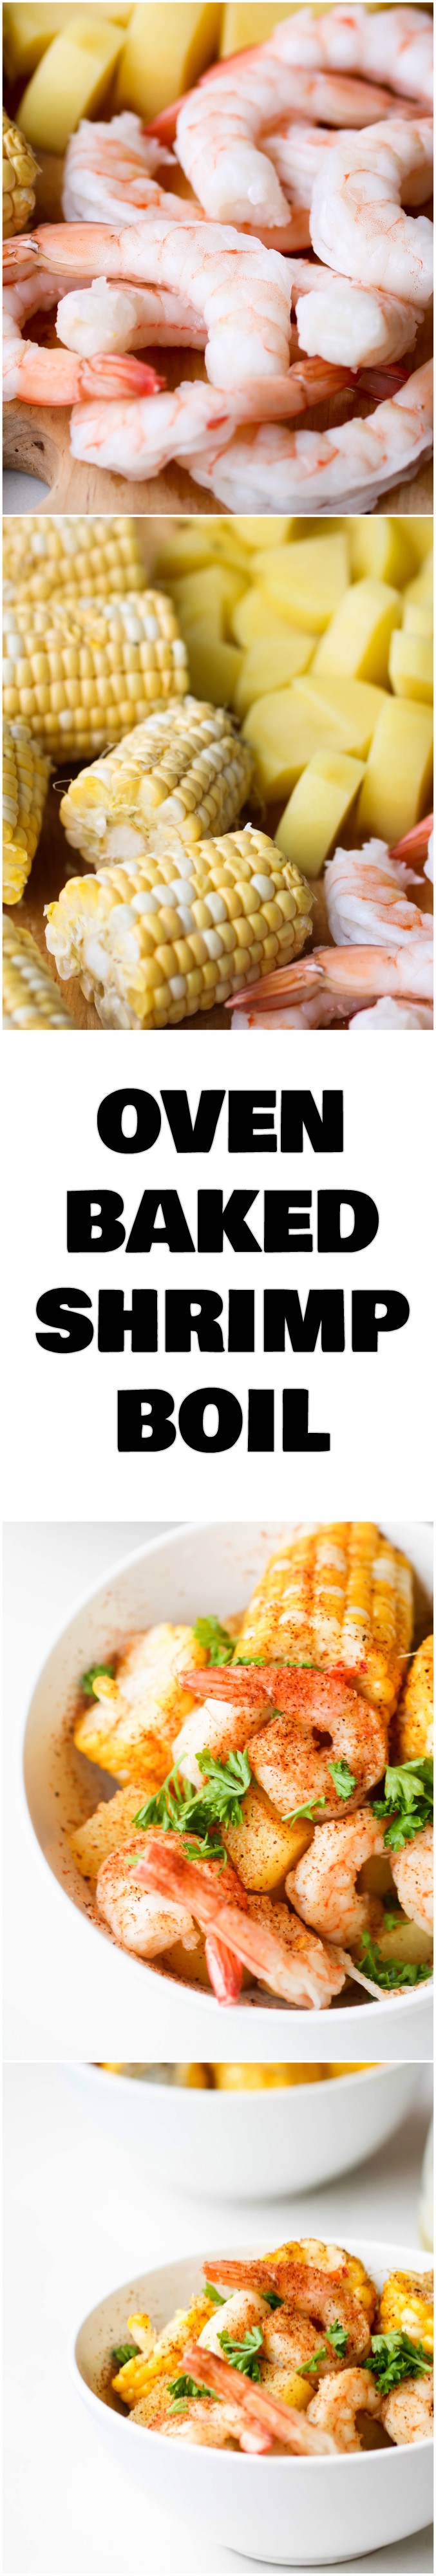 Oven baked Shrimp Boil is an easy dinner-friendly dish that can be enjoyed within less than an hour! Requires very little preparation, few ingredients, and pretty much no clean up.